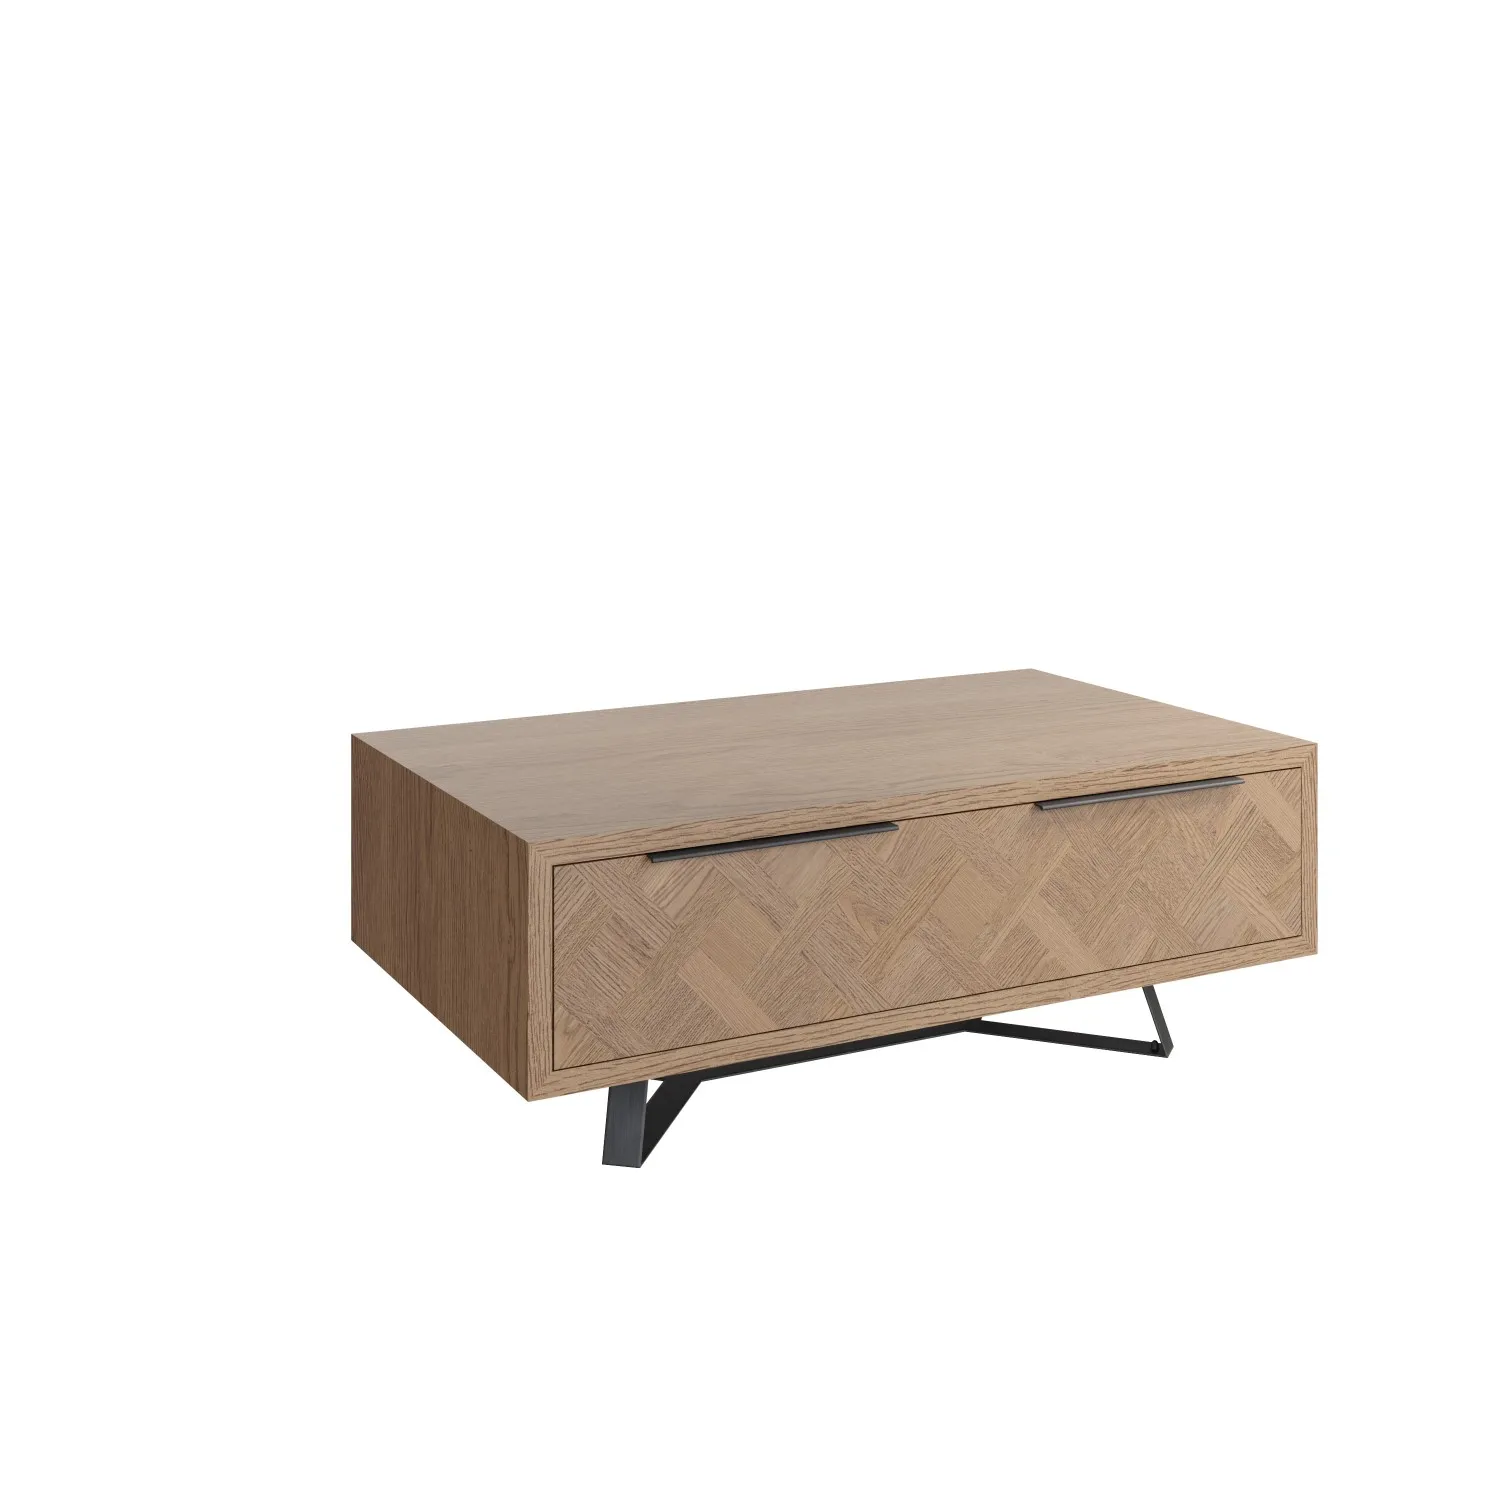 Wooden Parquet Coffee Table with Drawer